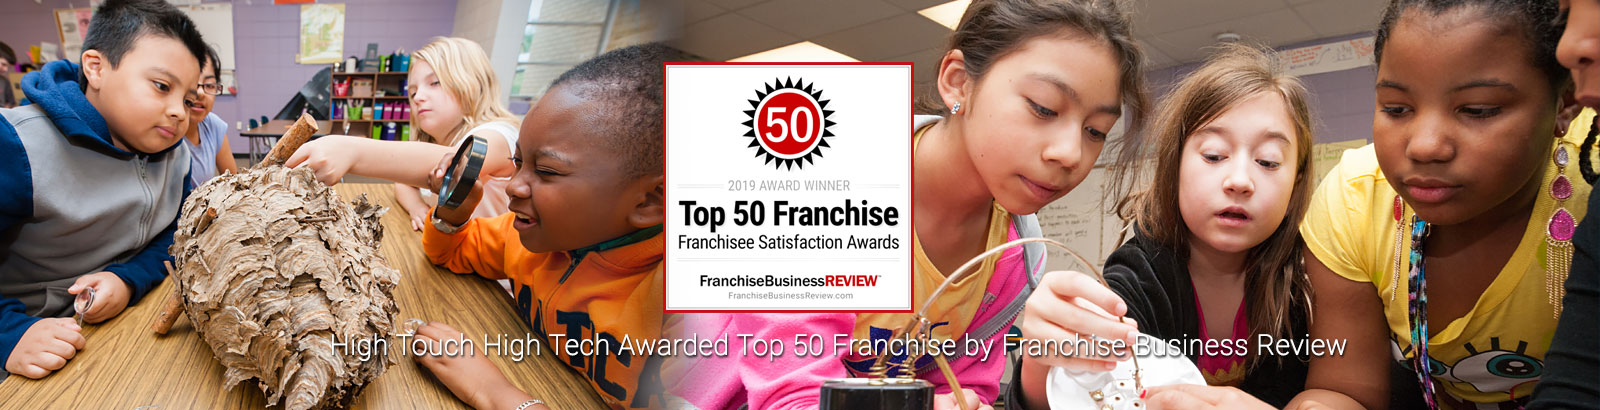 High Touch High Tech Awarded Top 50 Franchise